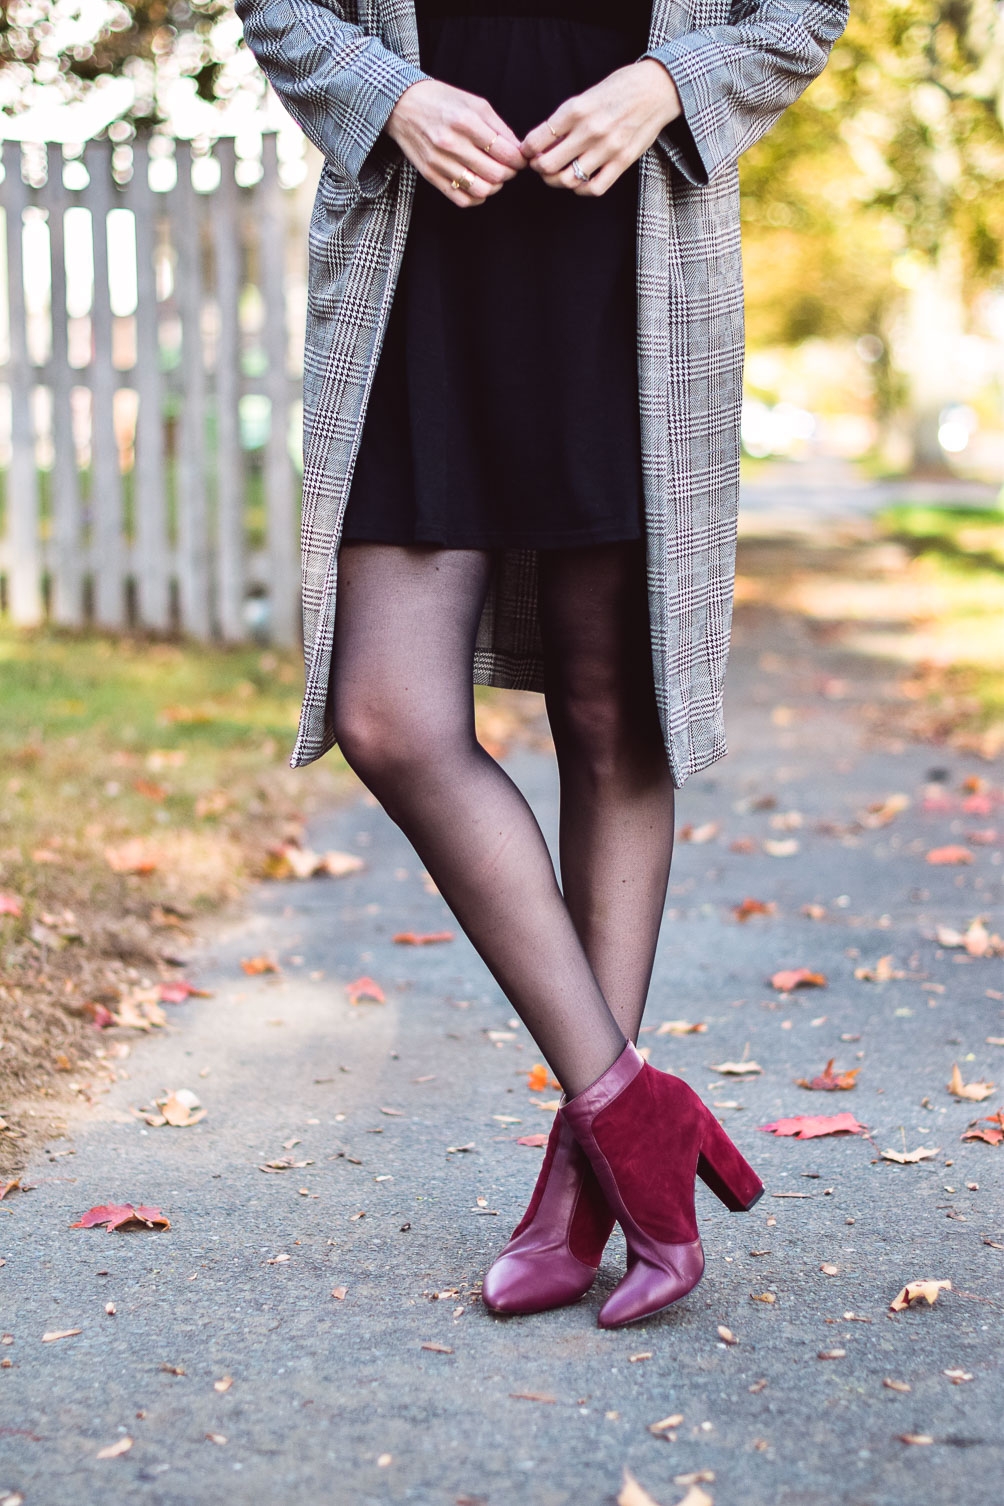 sharing an easy holiday party outfit with this Topshop balloon sleeve dress, checked trench coat, and oxblood booties